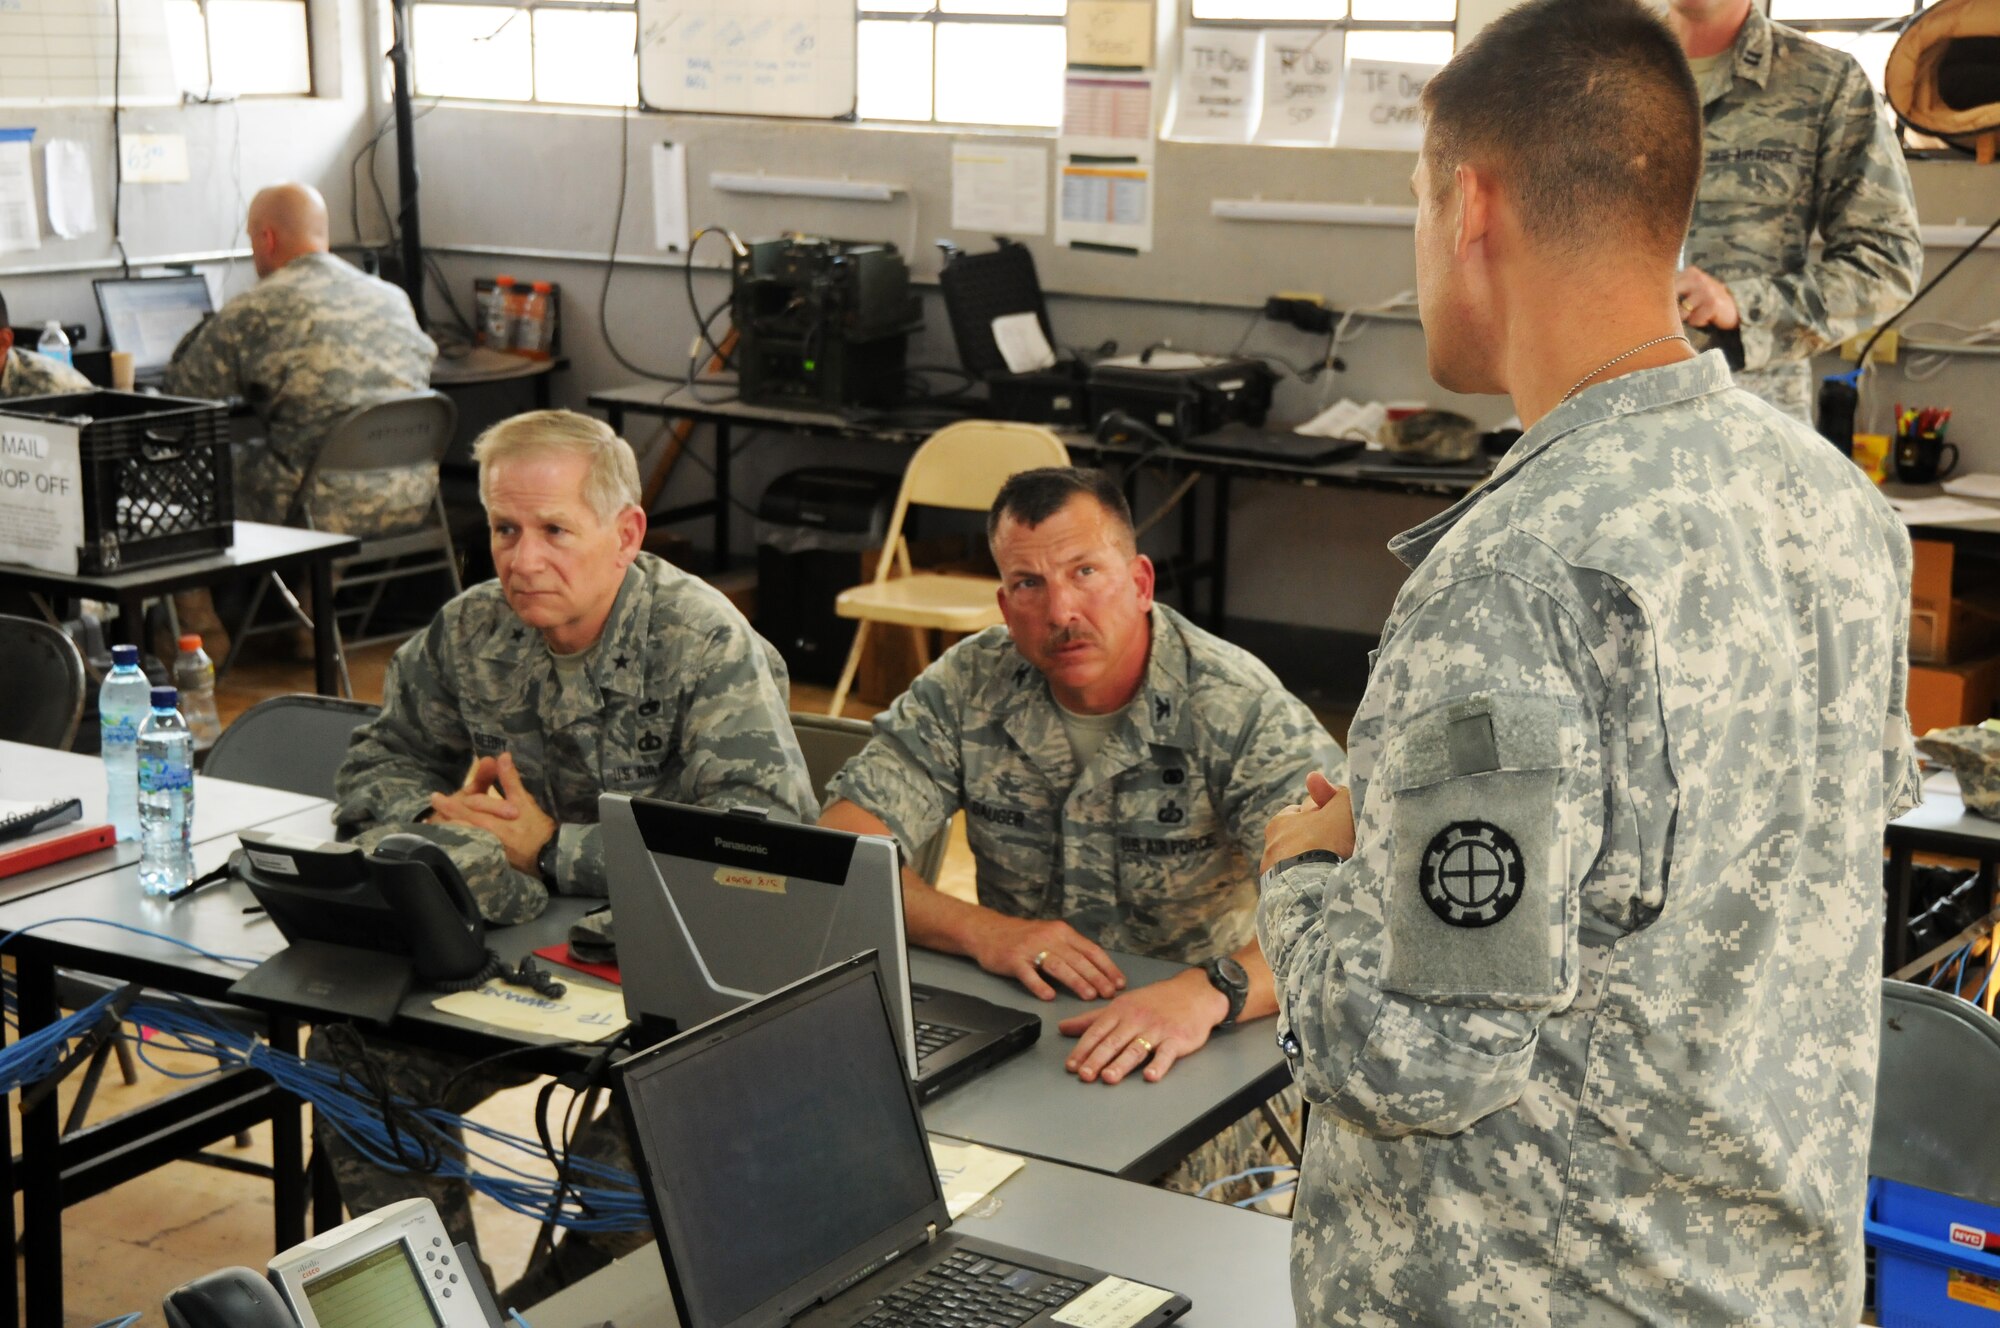 Brig. Gen. Mark Berry, Arkansas Air National Guard chief of staff, left, and Col. Pete Gauger, 188th Fighter Wing vice commander, middle; receive a mission briefing at a Guatemalan Army base in Zacapa April 14, 2014. The 188th Civil Engineer Squadron deployed to Guatemala in support of a U.S. Army South-led humanitarian mission called Beyond the Horizon.  The 188th Airmen were there to build a school in the remote town of El Robles, Guatemala. (U.S. Air National Guard photo by Maj. Heath Allen/released)